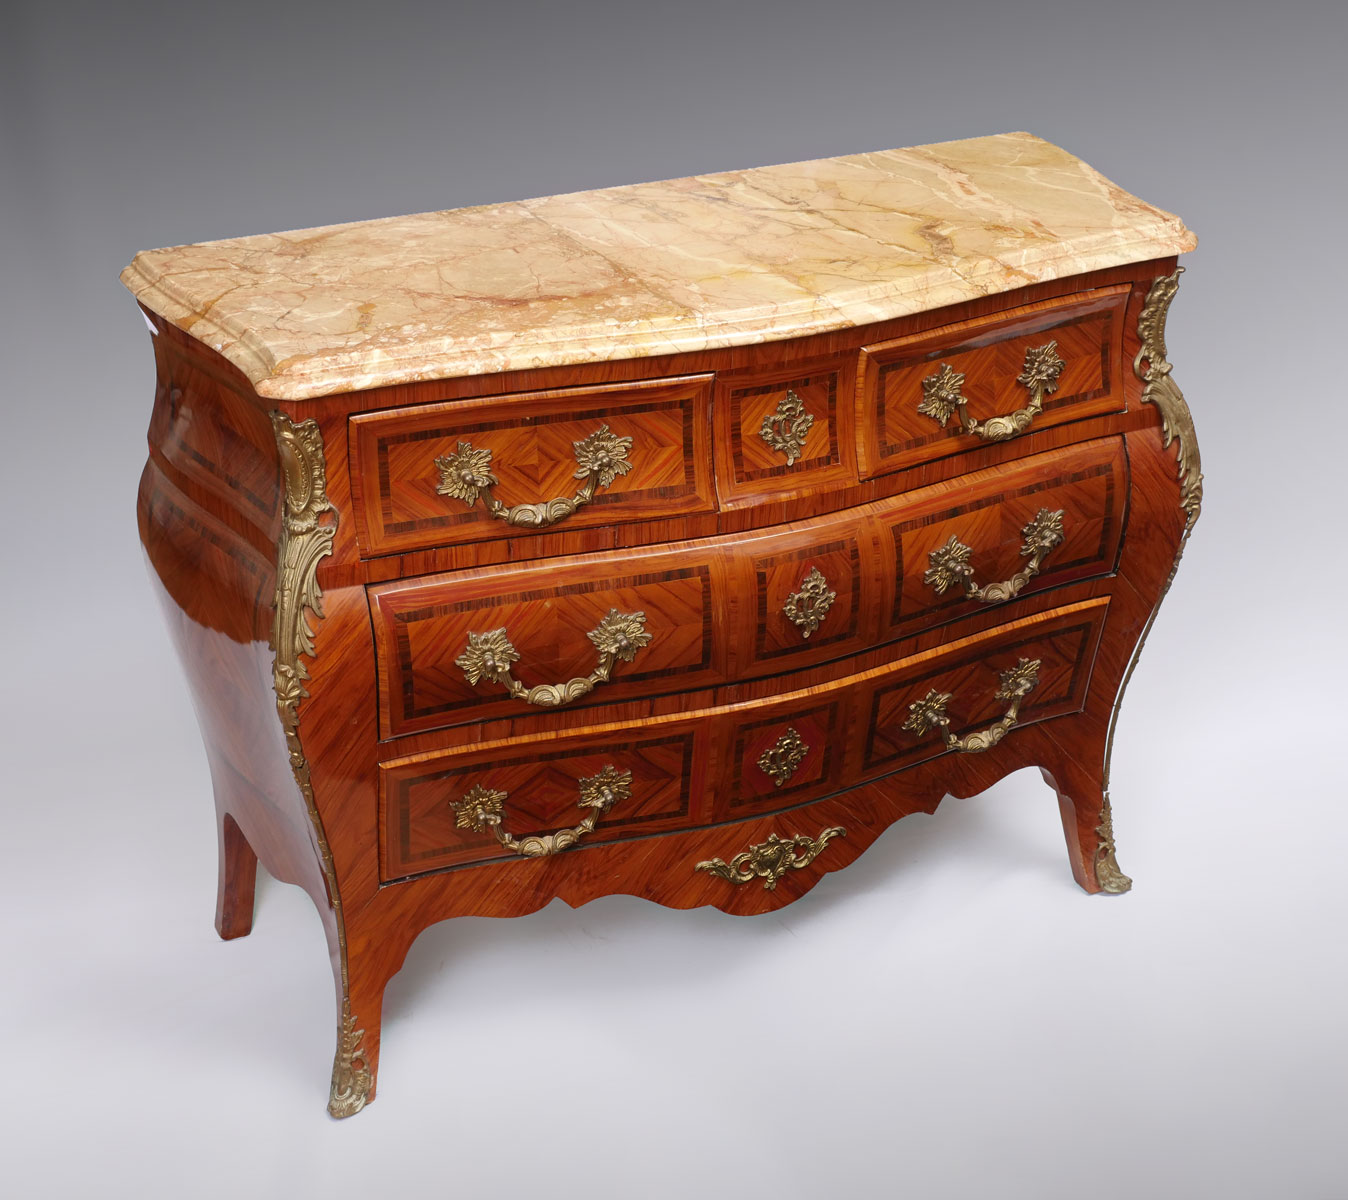 MARBLE TOP BOMBE COMMODE: Bombe